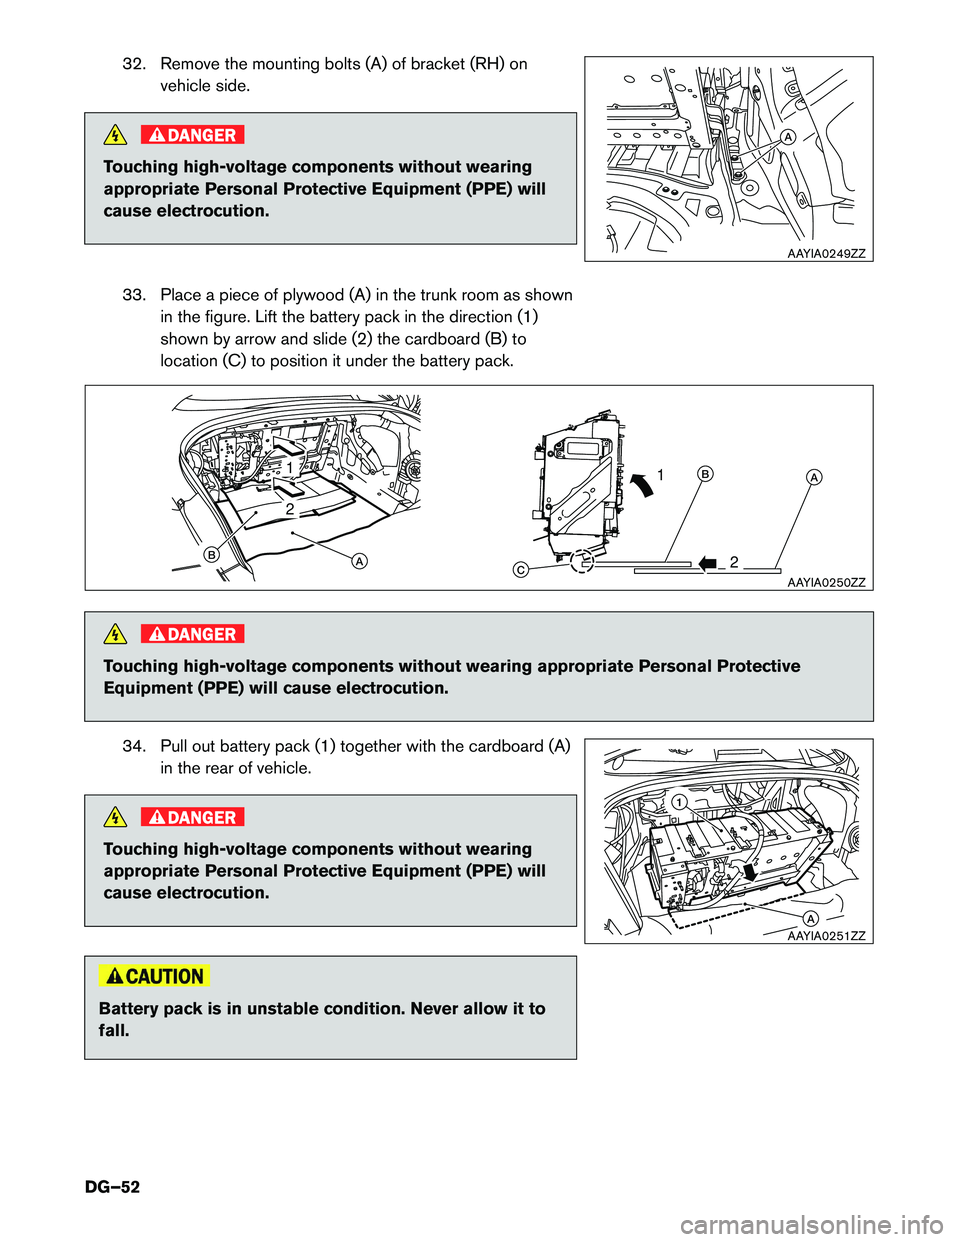 INFINITI Q50 HYBRID 2017  Dismantling Guide 32. Remove the mounting bolts (A) of bracket (RH) on
vehicle side. DANGER
Touching high-voltage components without wearing
appropriate

Personal Protective Equipment (PPE) will
cause electrocution.
33